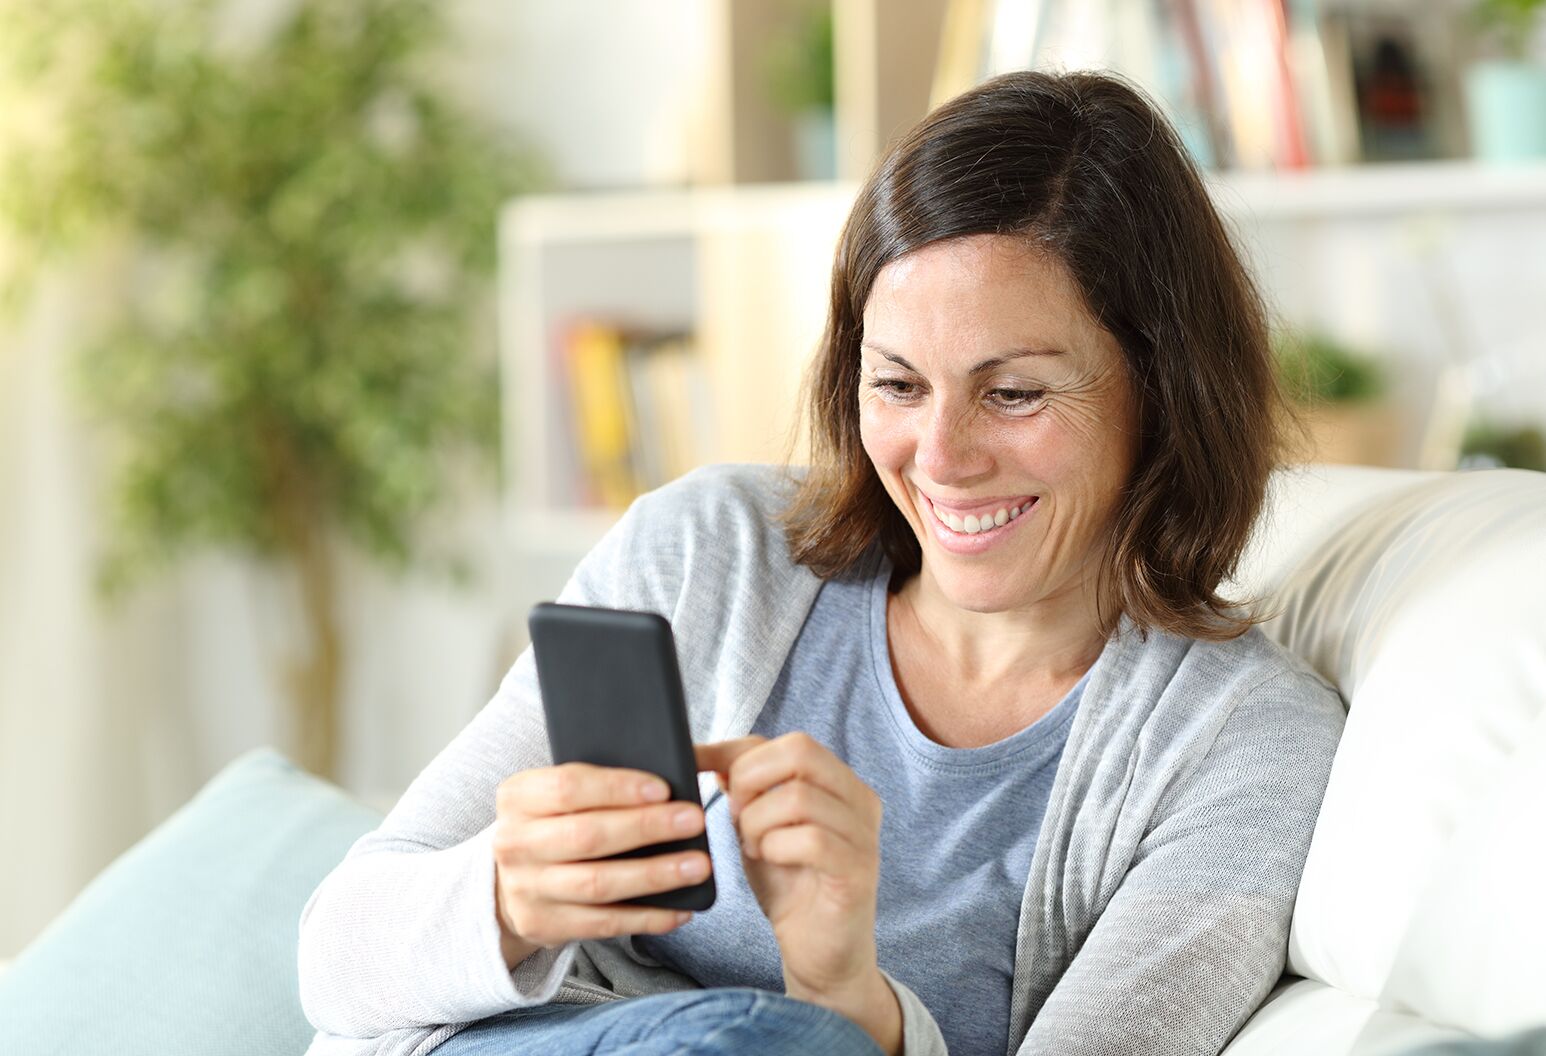 A young woman with brown straight hair is using mobile phone. Female is smiling while holding smart phone. She is sitting on sofa at home.